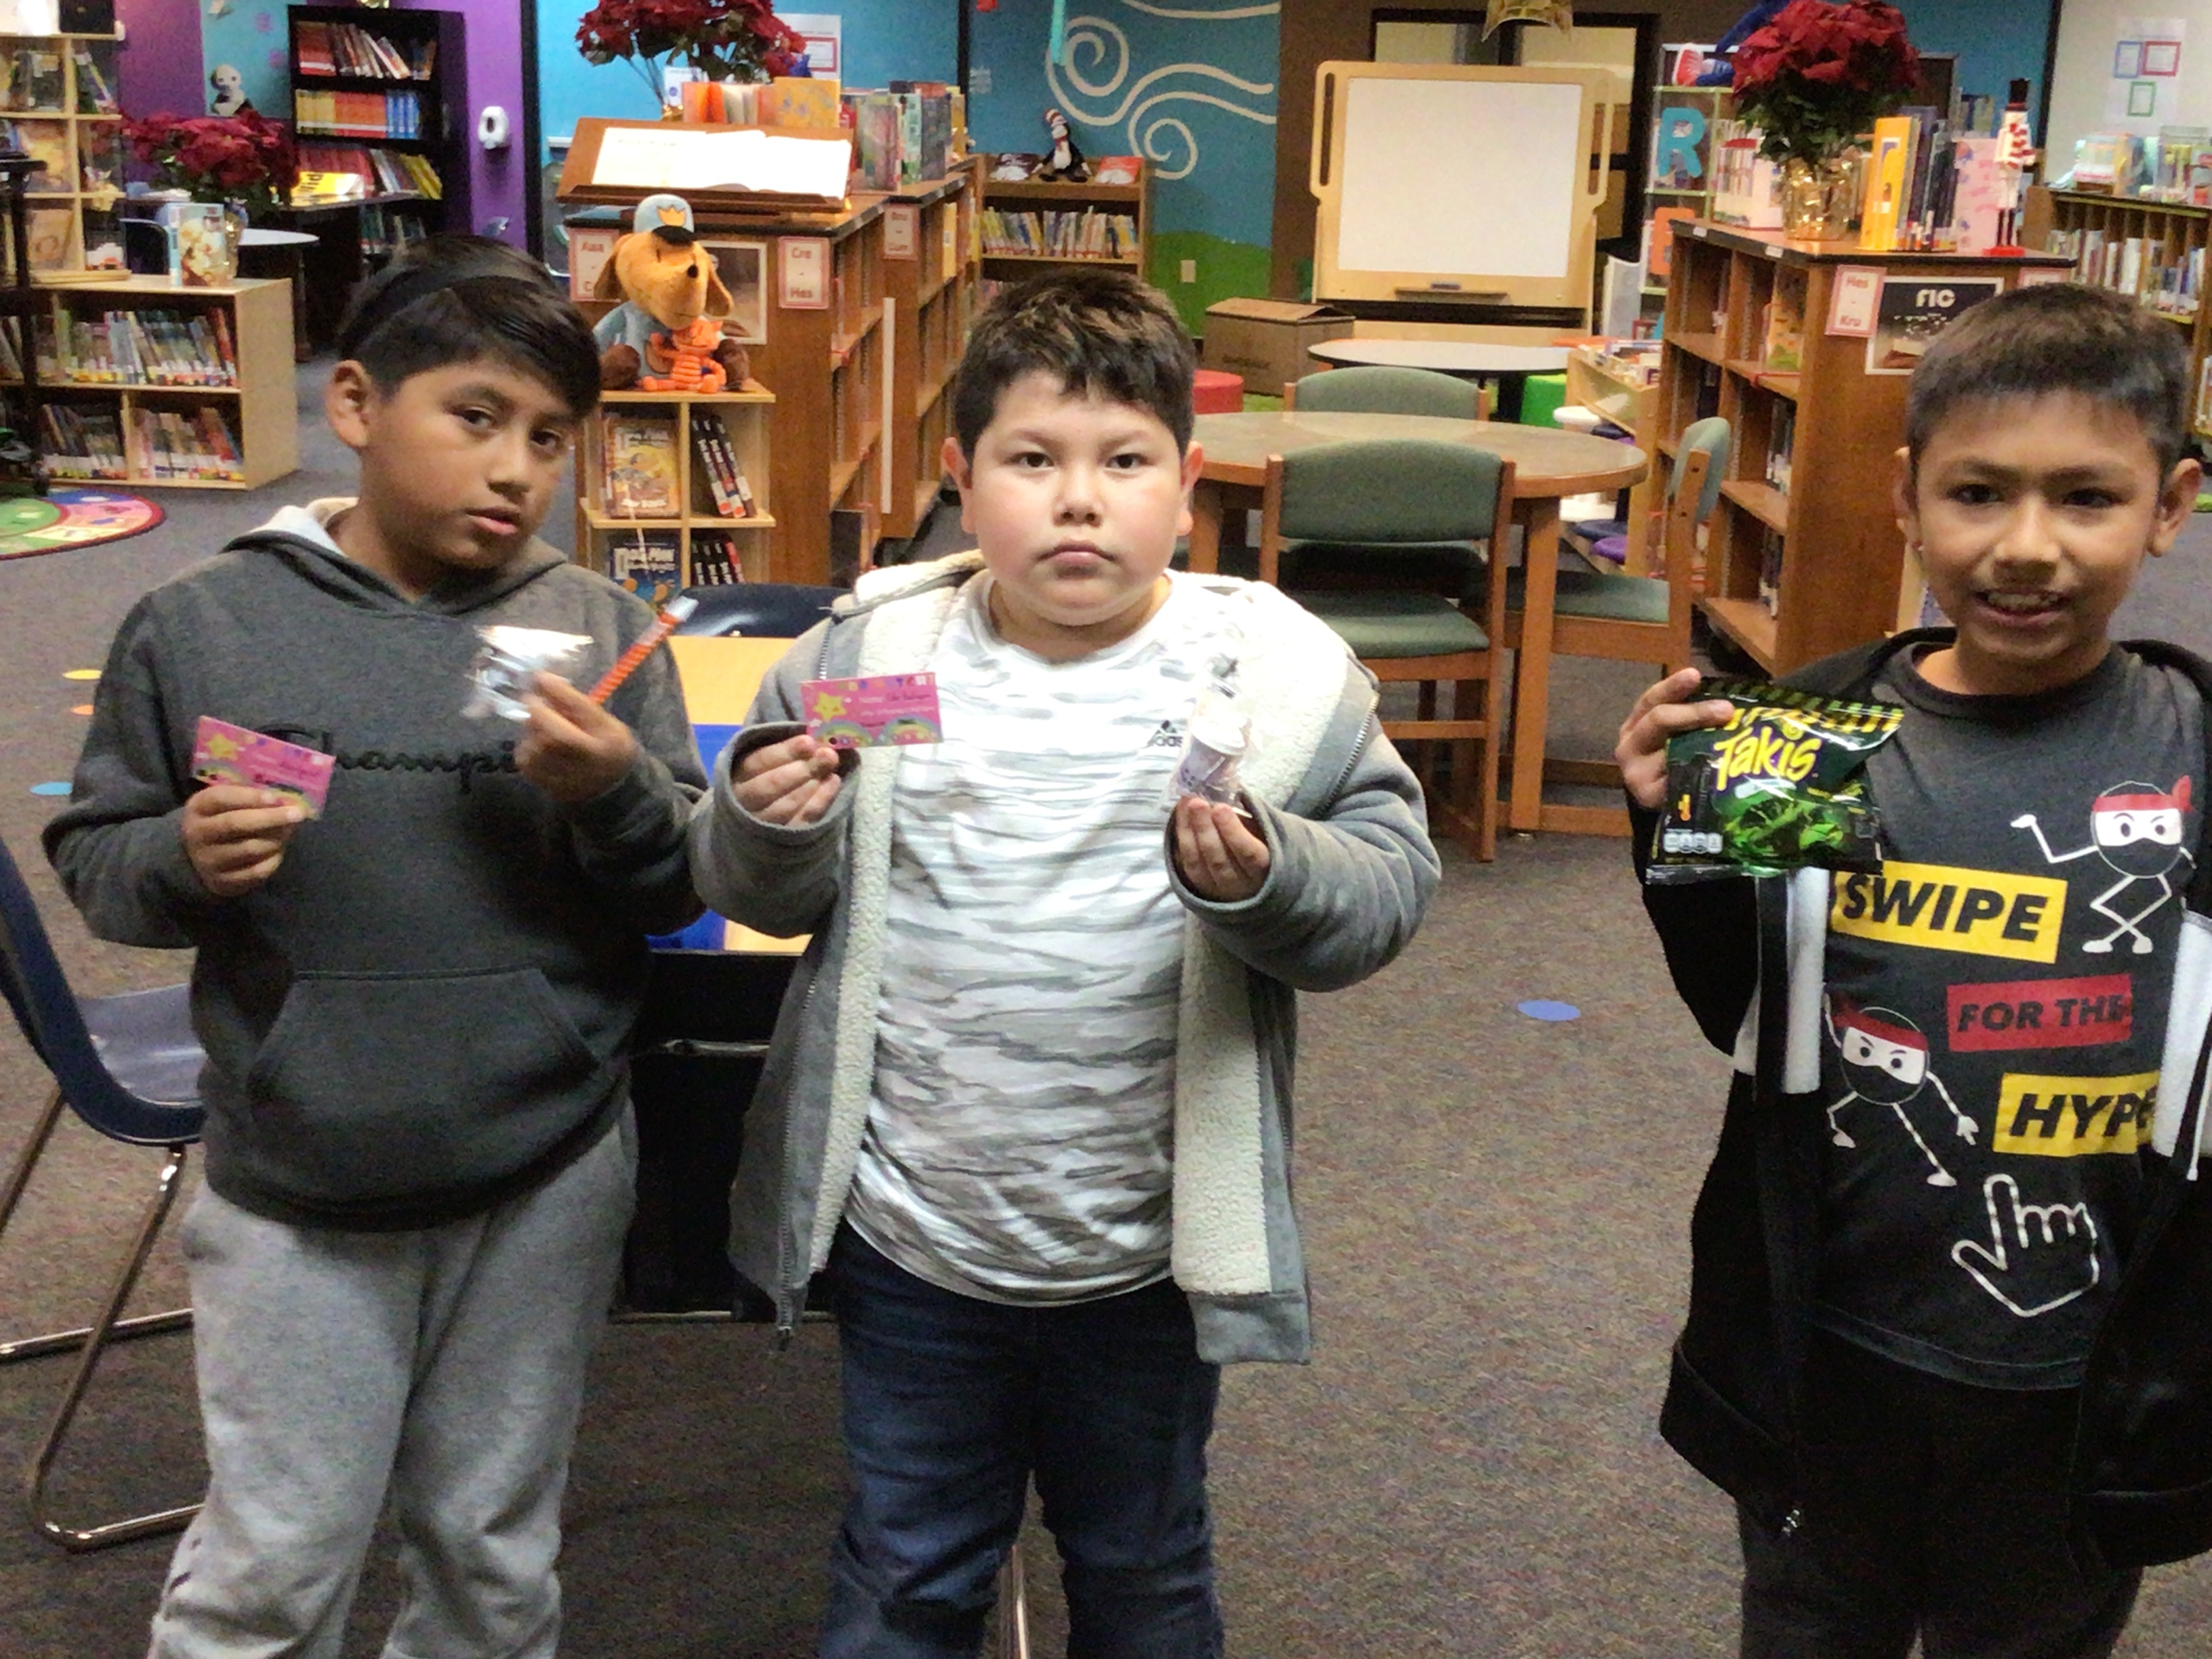 Students have been rewarded for reading at least 10 books in our 100 book Reading Challege